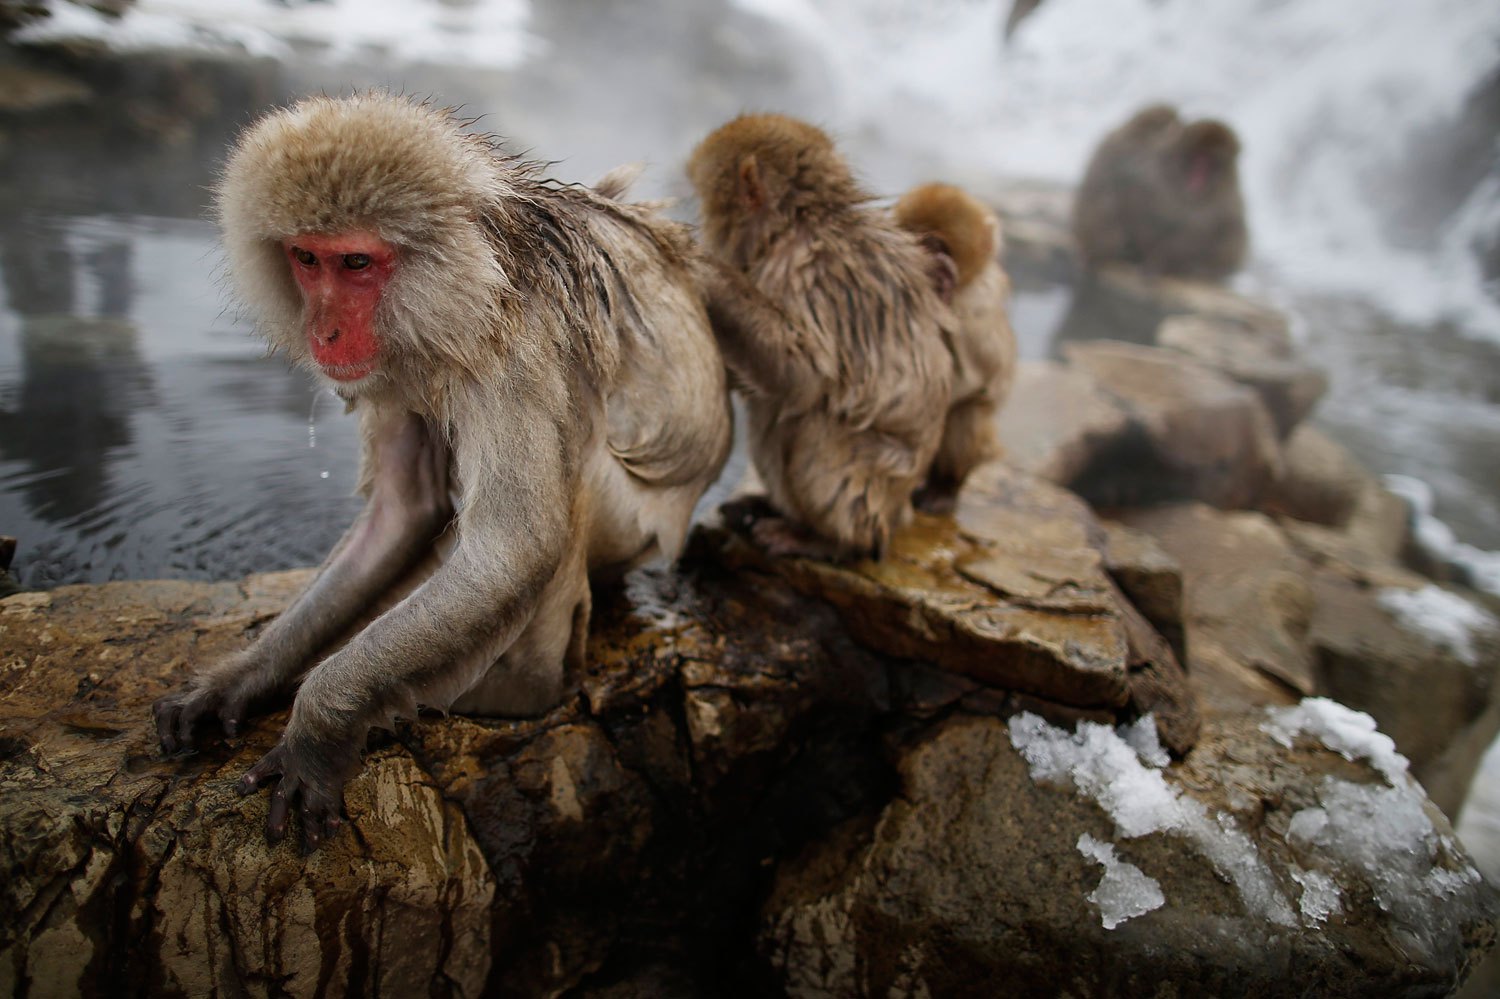 Japanese Macaques - or Snow Monkeys - groom each other in a hot spring at a snow-covered valley in Yamanouchi town, central Japan, Jan. 20, 2014.